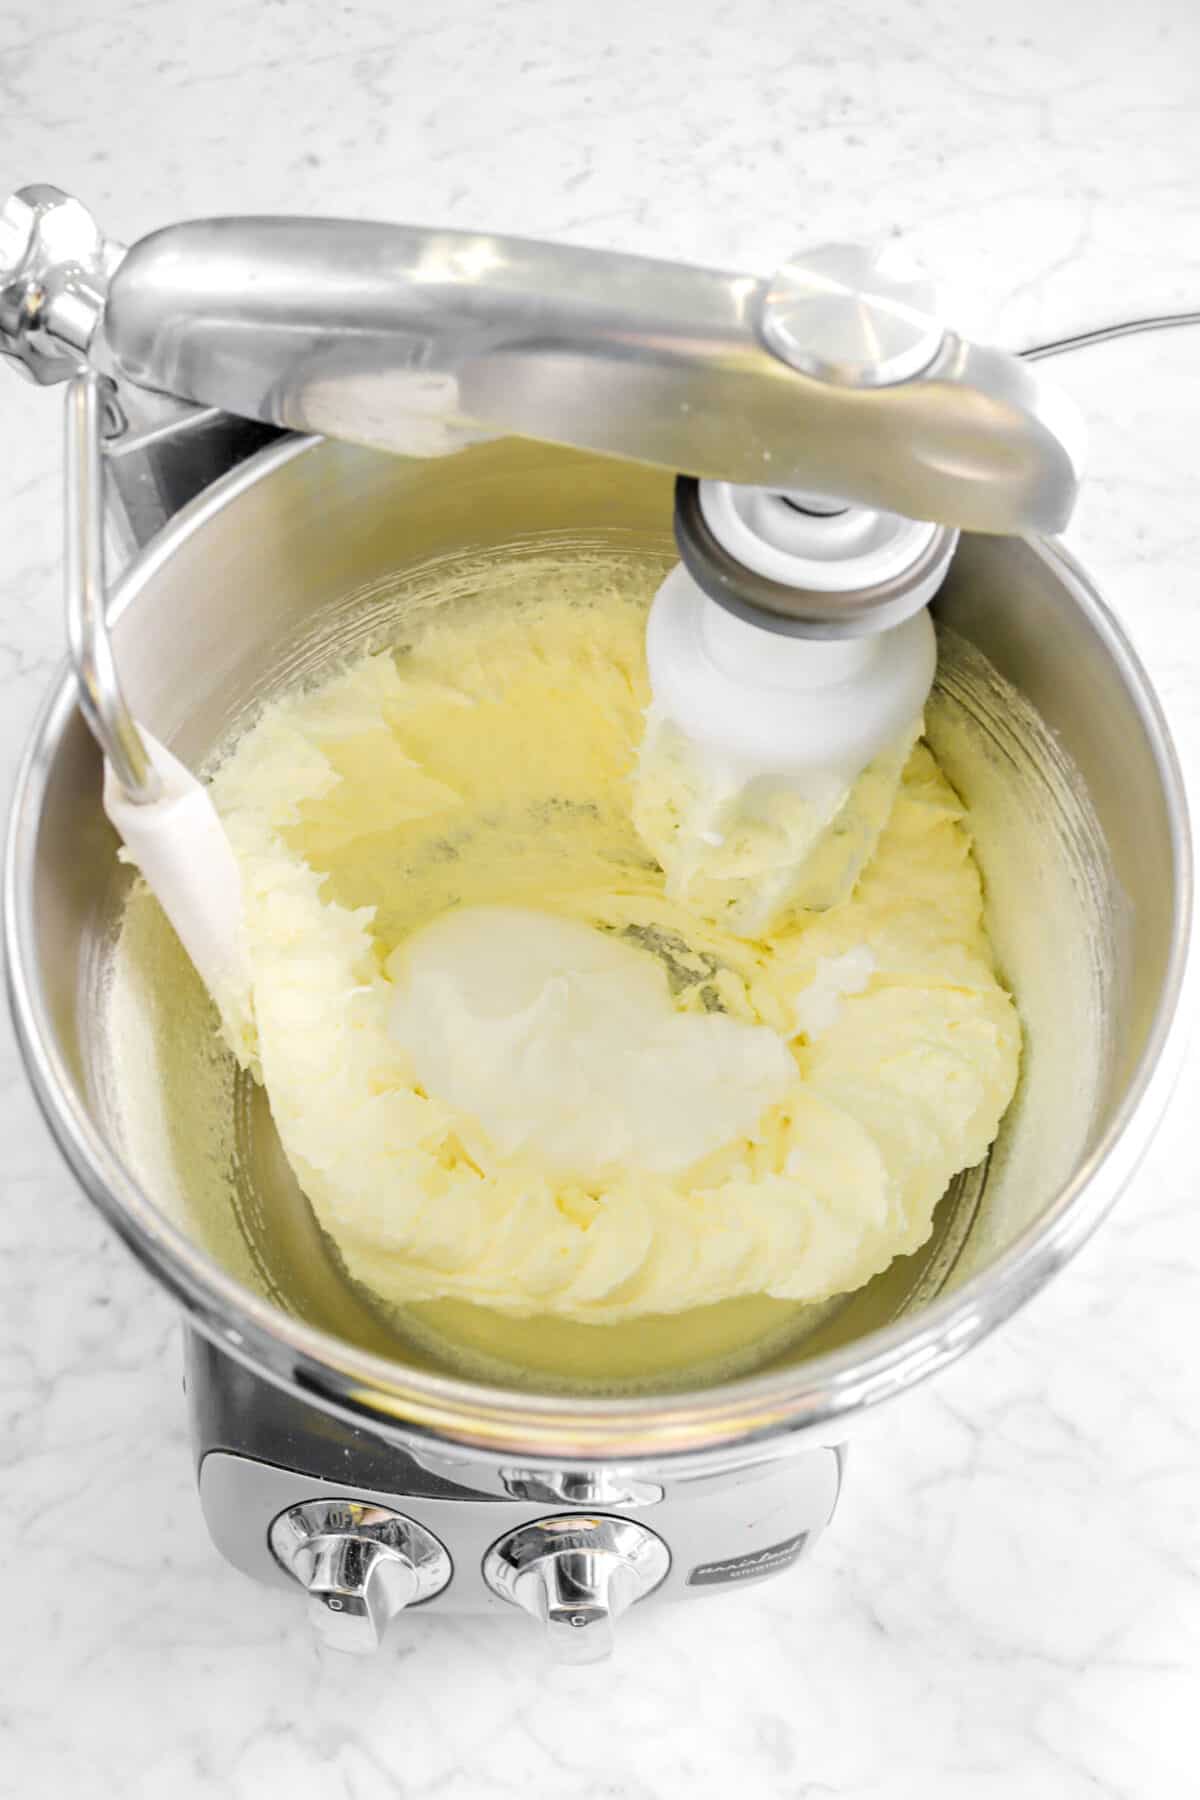 sour cream added to butter mixture